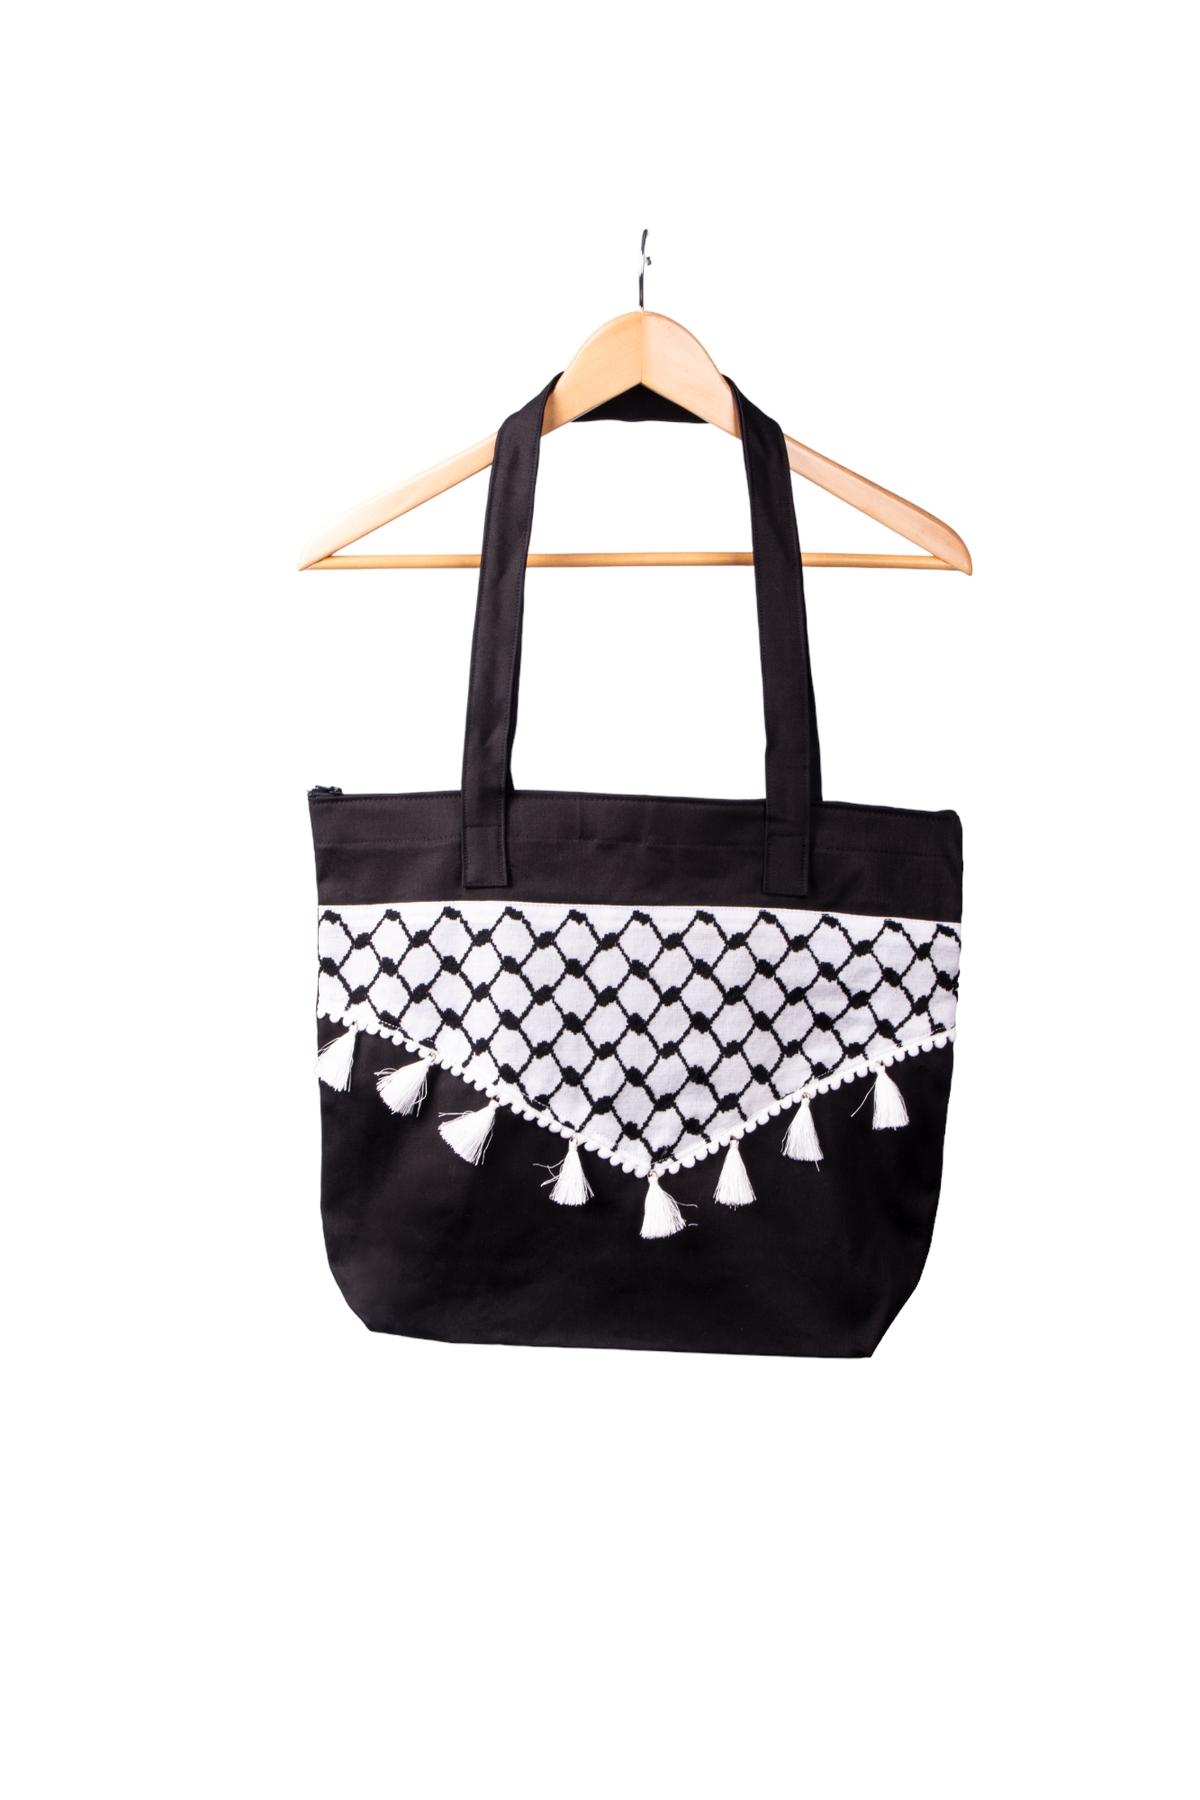 High Quality Black Shopping Bag Decorated with a Palestinian Keffiyeh ...